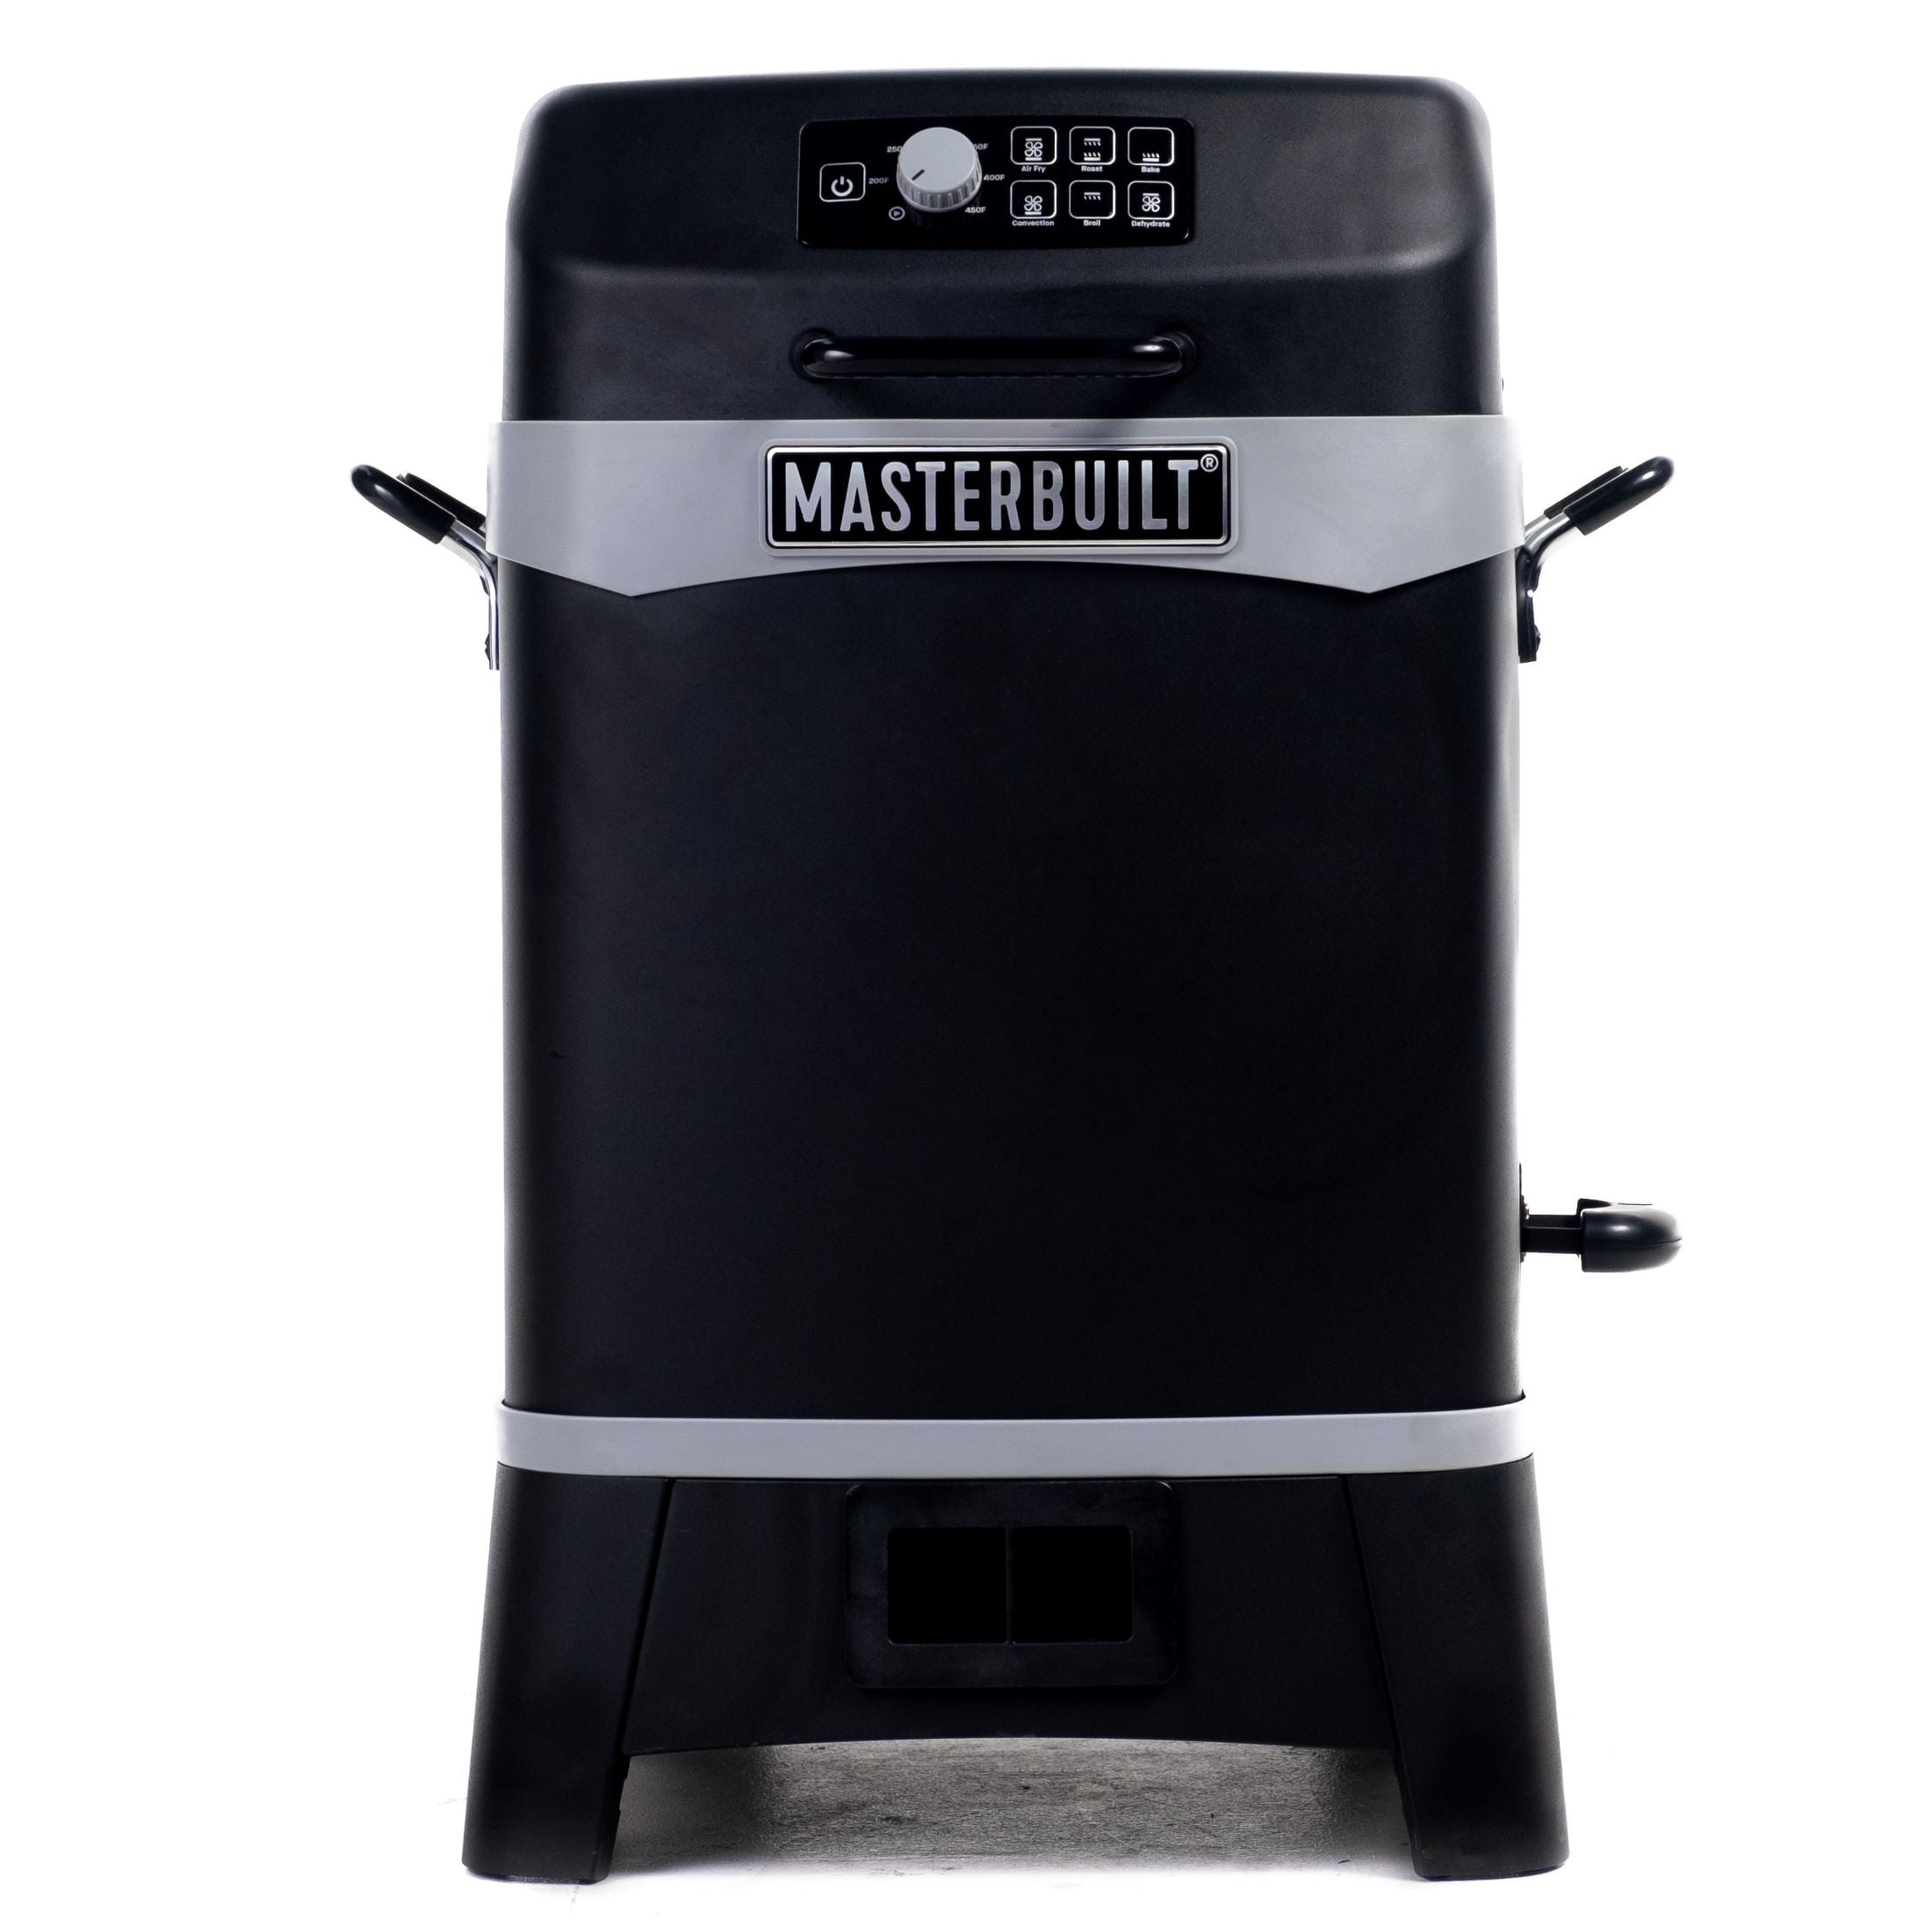 Master built 20 quart 7-in-1 outdoor air fryer IN HAND FAST SHIPPING 